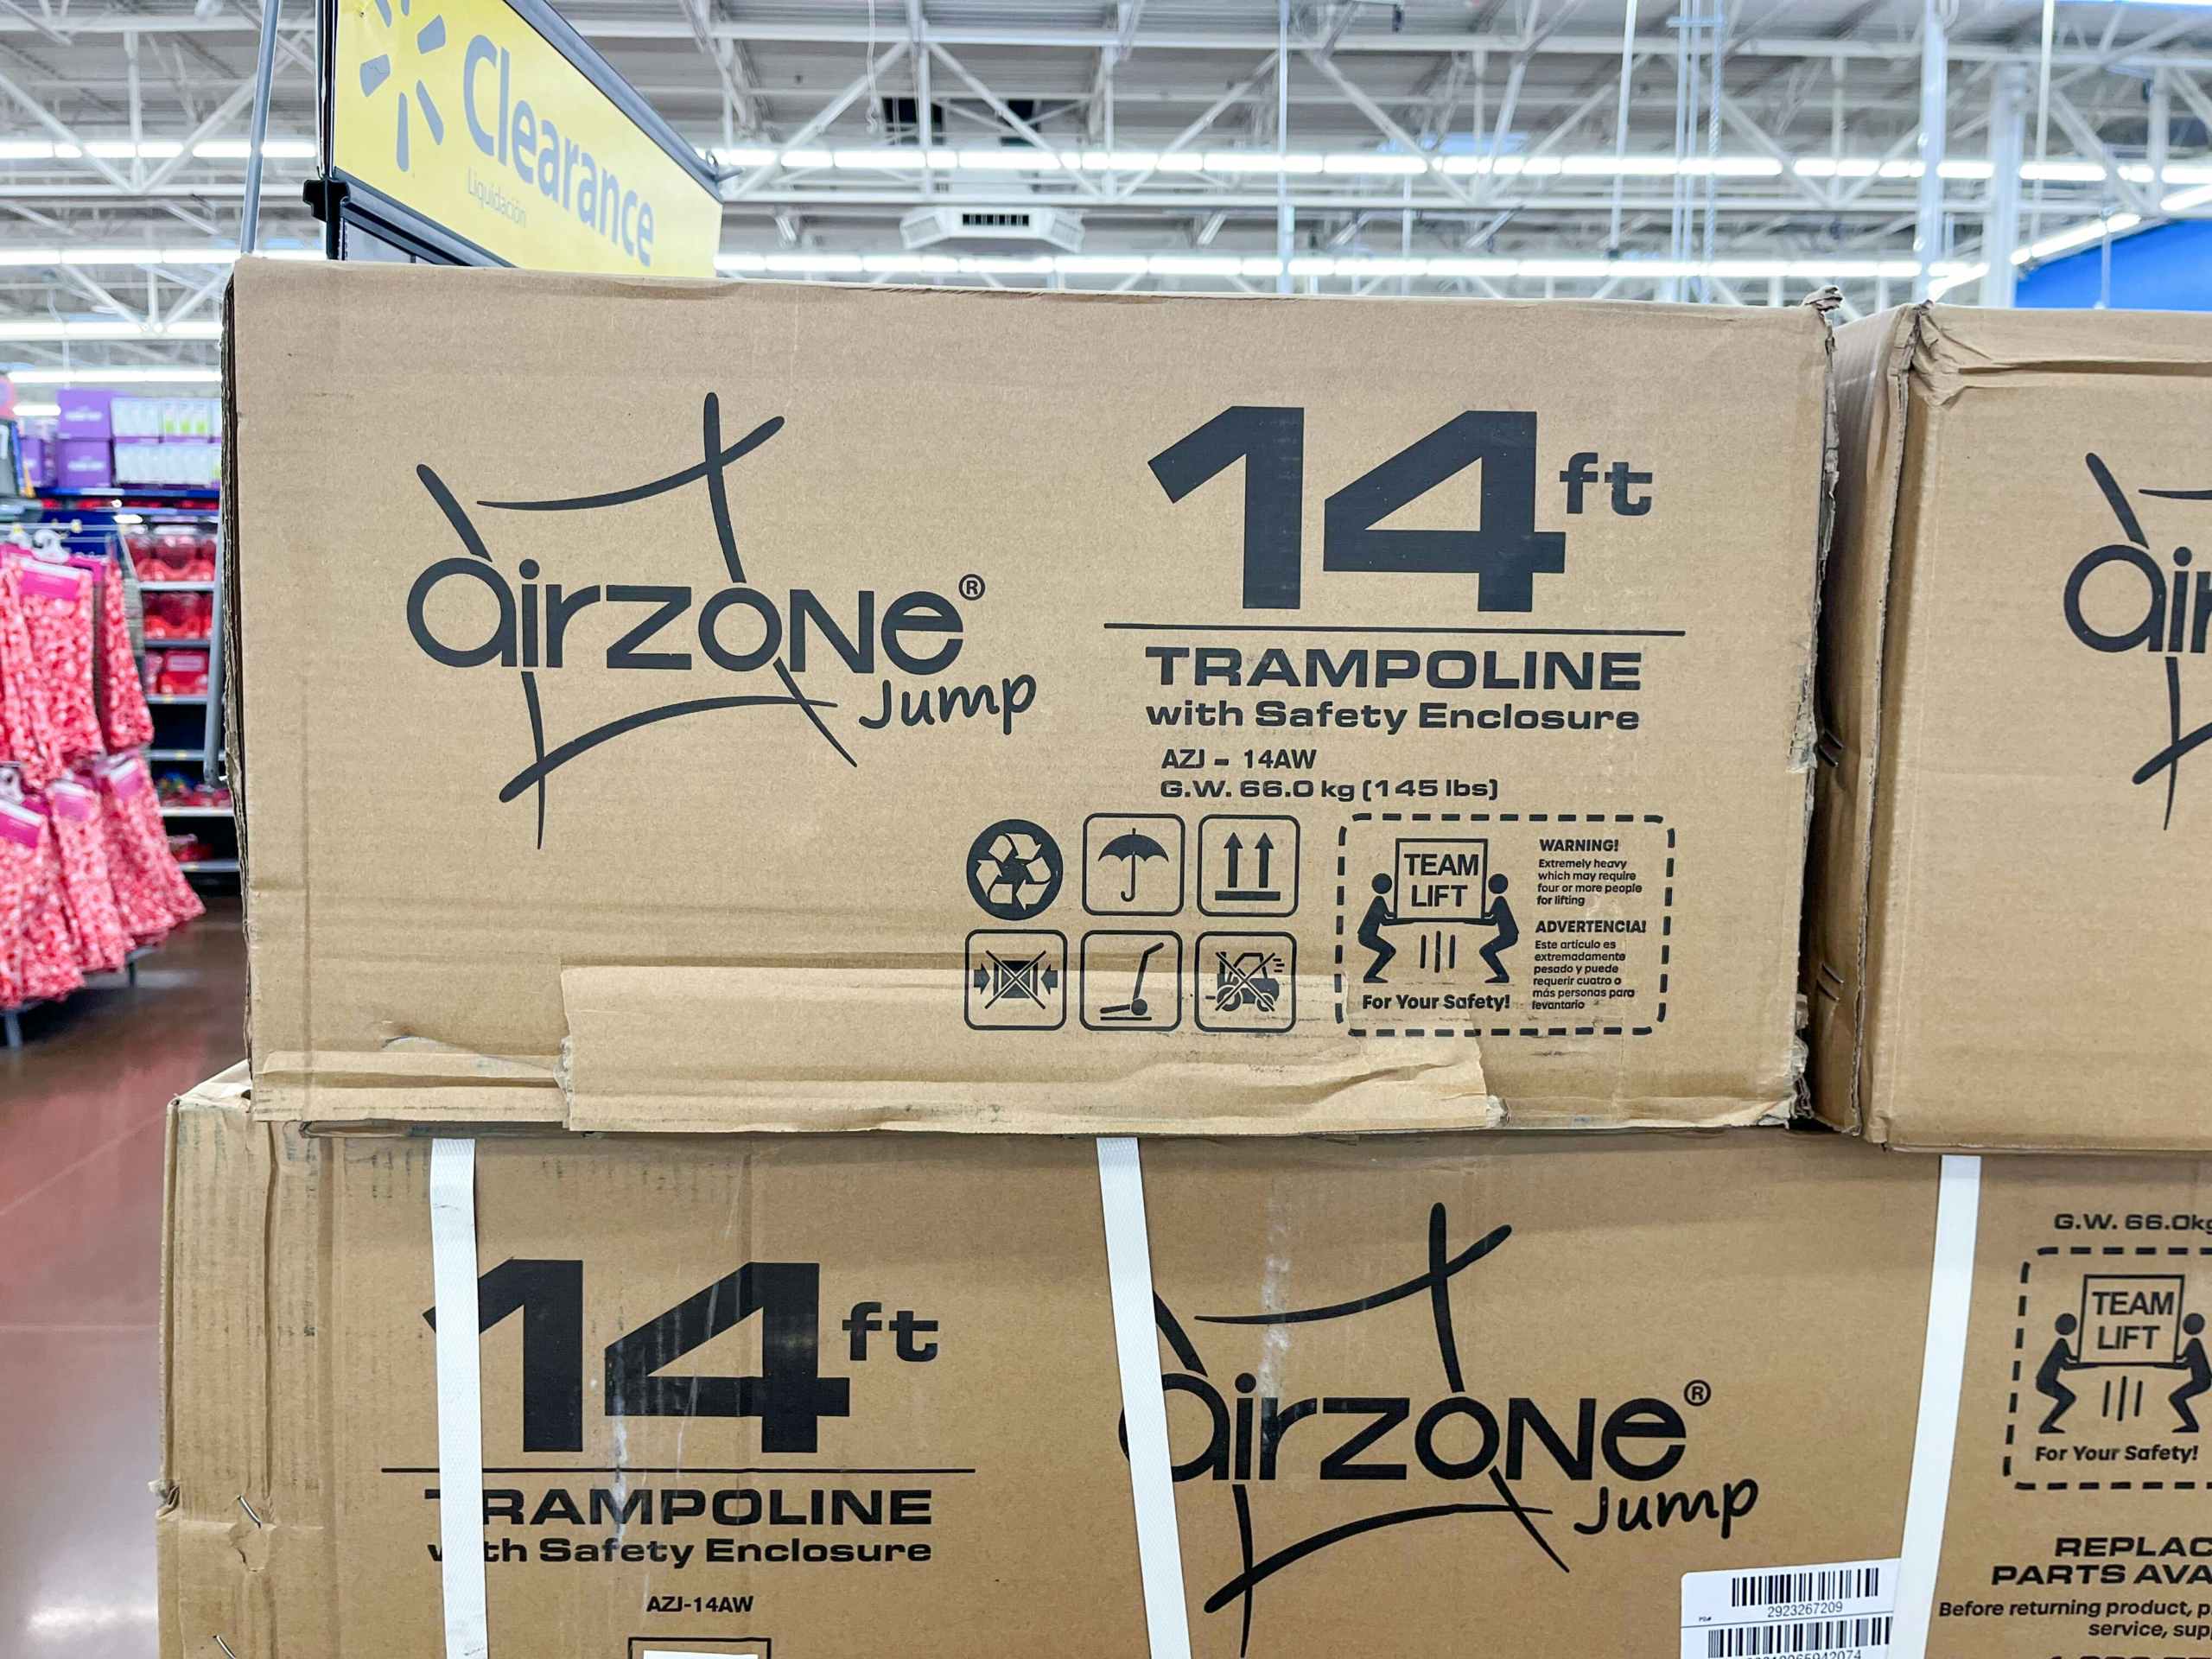 Airzone Trampoline Clearance at Walmart